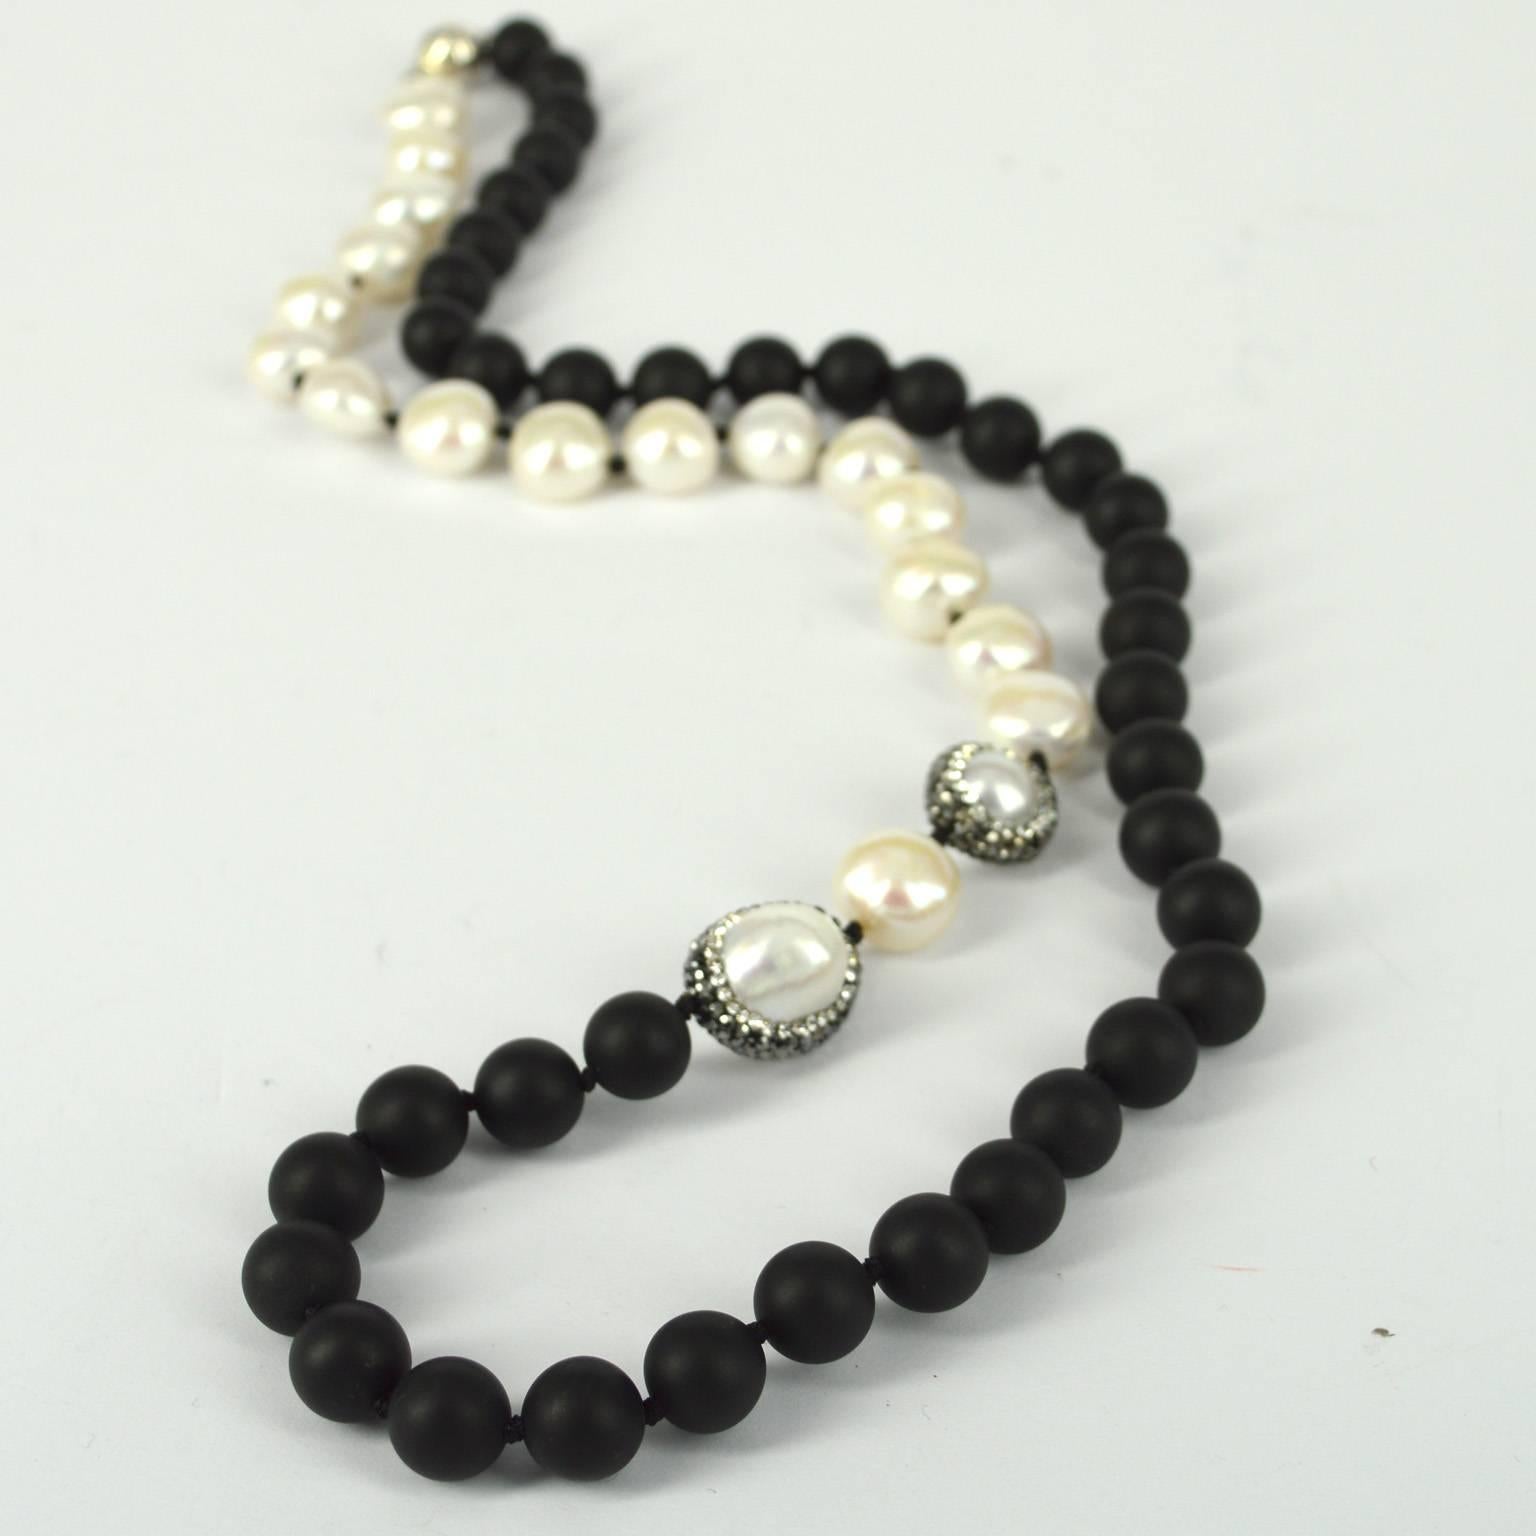 10mm matt black Onyx beads with 12mm Fresh Water Pearls and 2 feature Fresh Water Pearls pave set with crystals measuring 14mm and 12x20mm, hand knotted on black thread and finished with a 10mm Sterling silver clasp.
Finished necklace measures 74cm